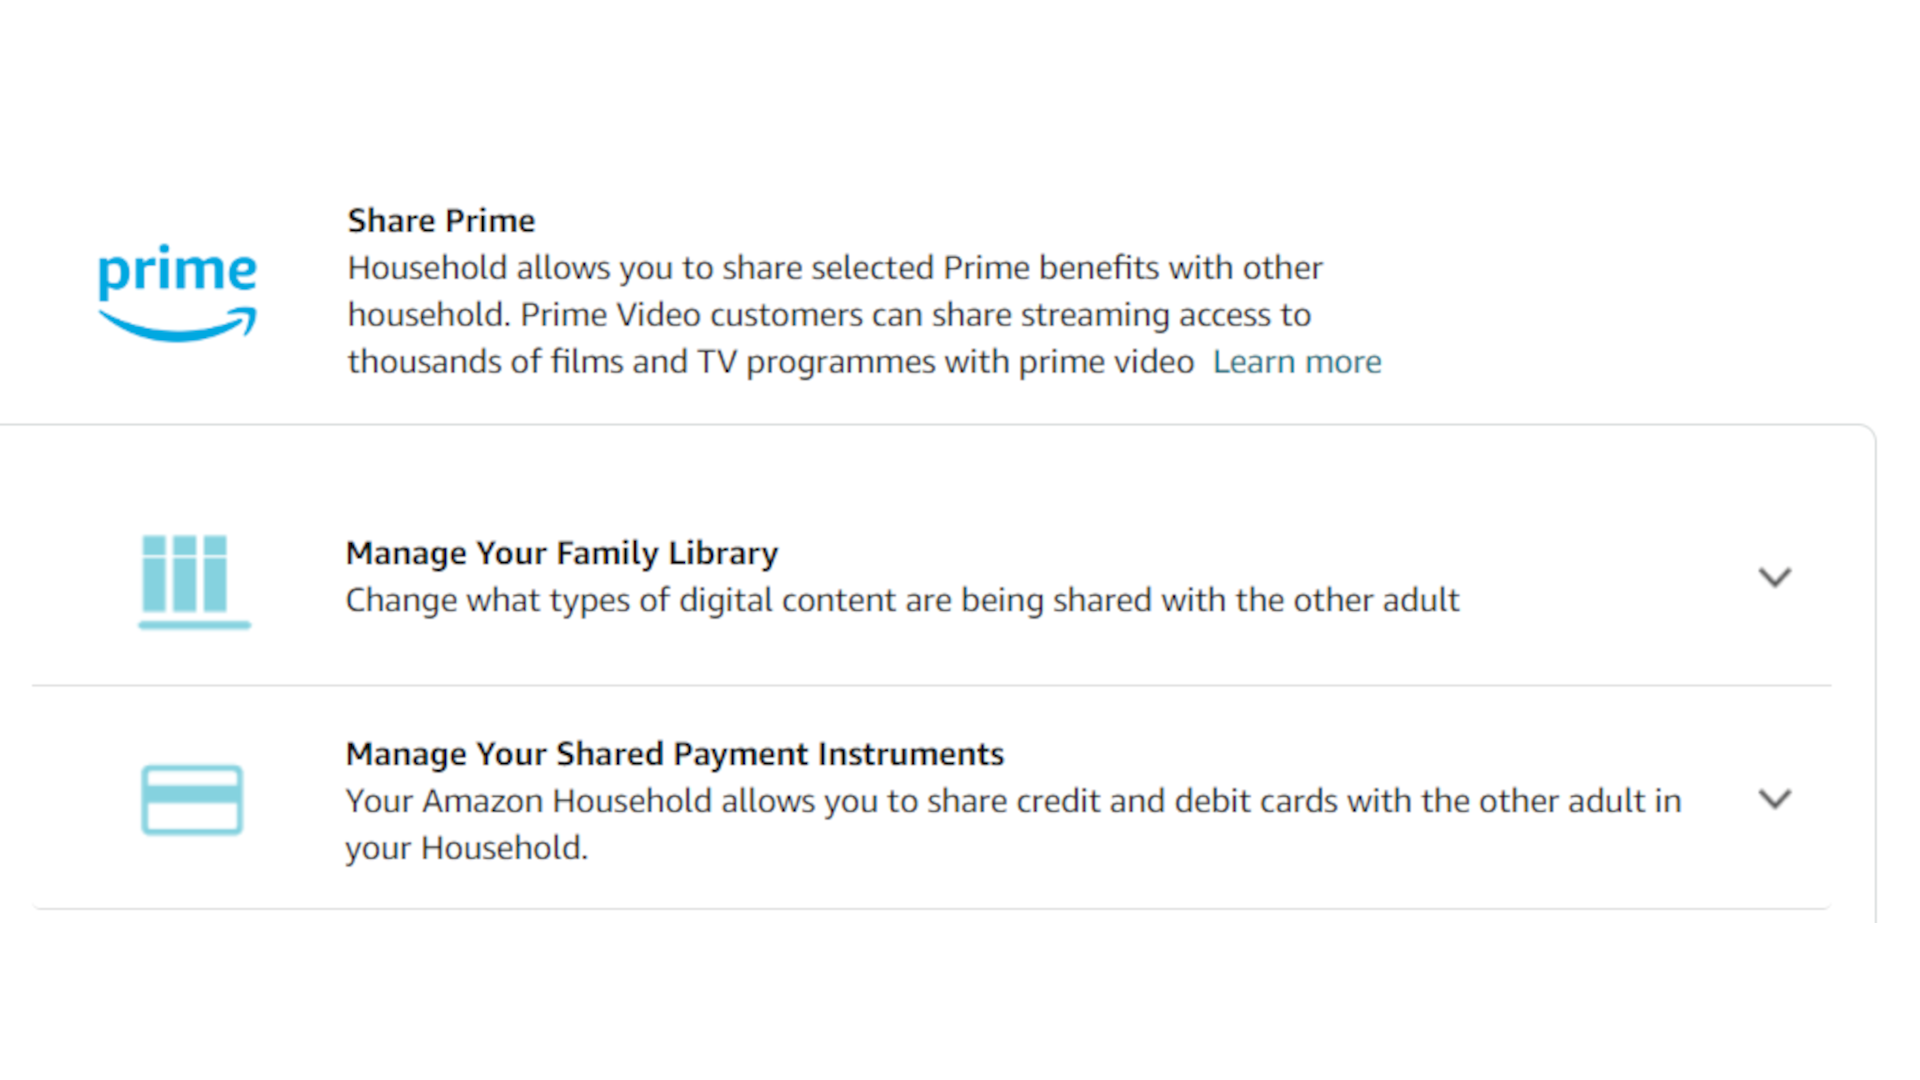 an image shows the Amazon Household page.